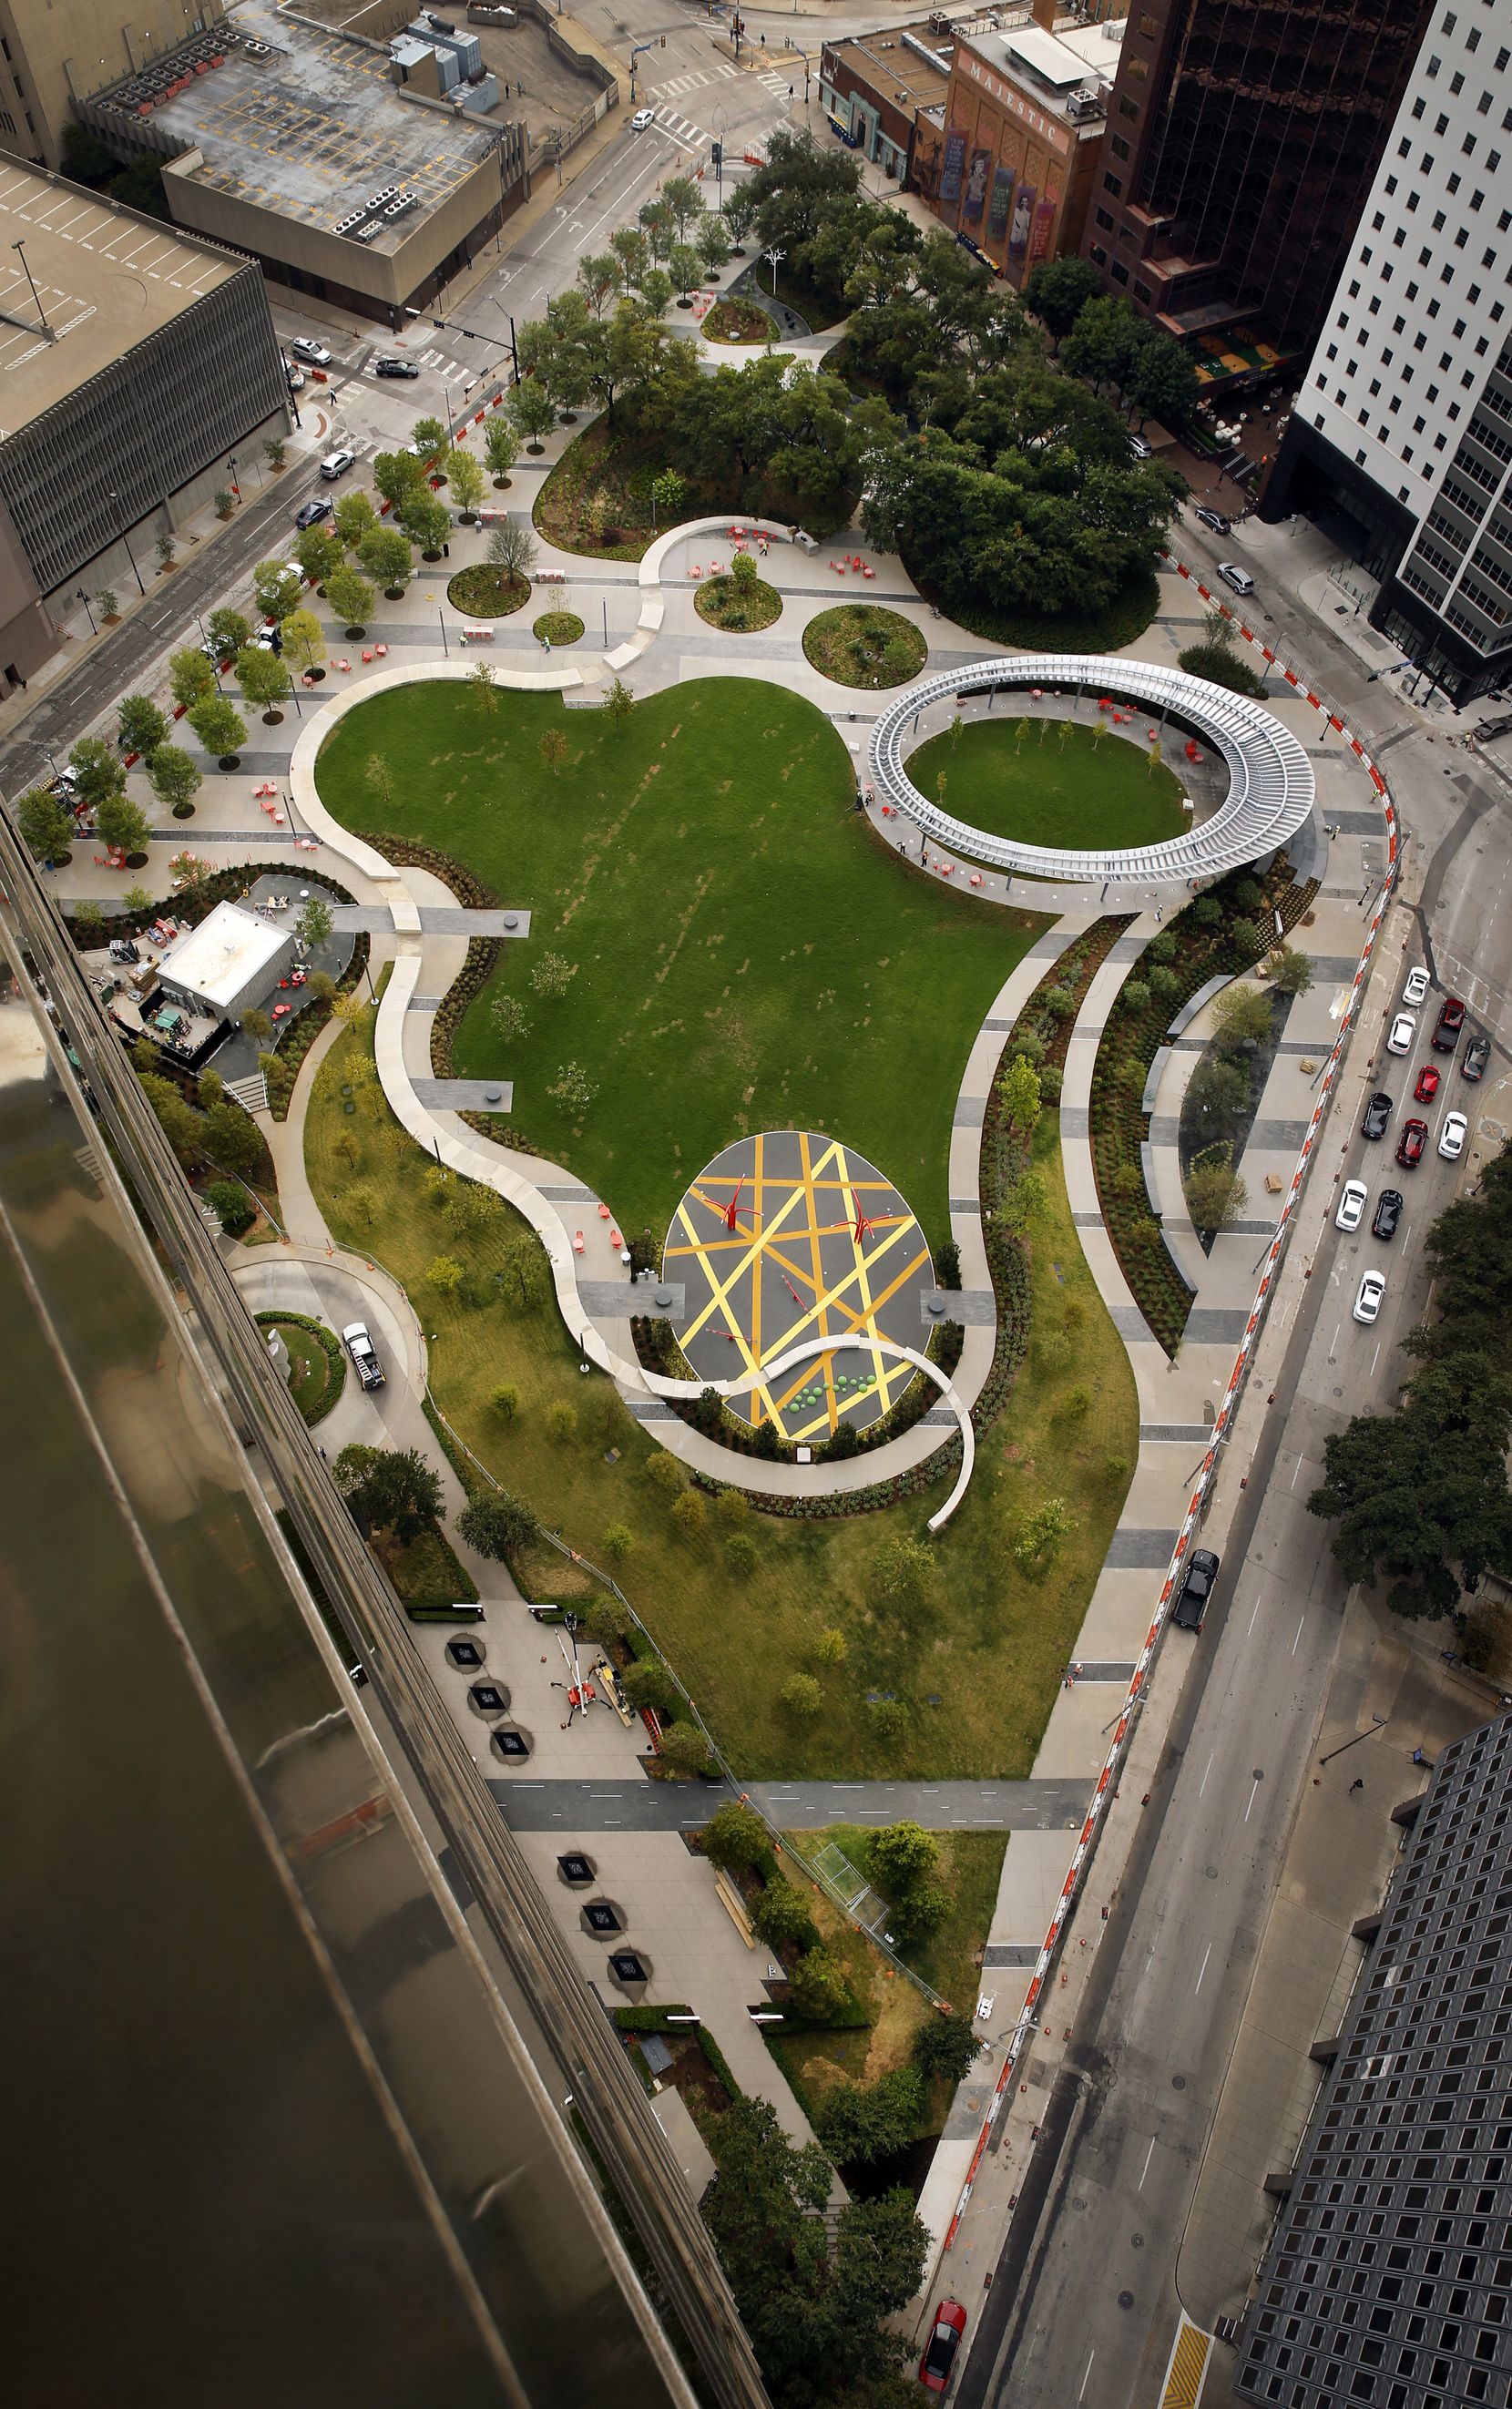 An overhead view of Pacific Plaza shows key features of the park. The play area (center,...